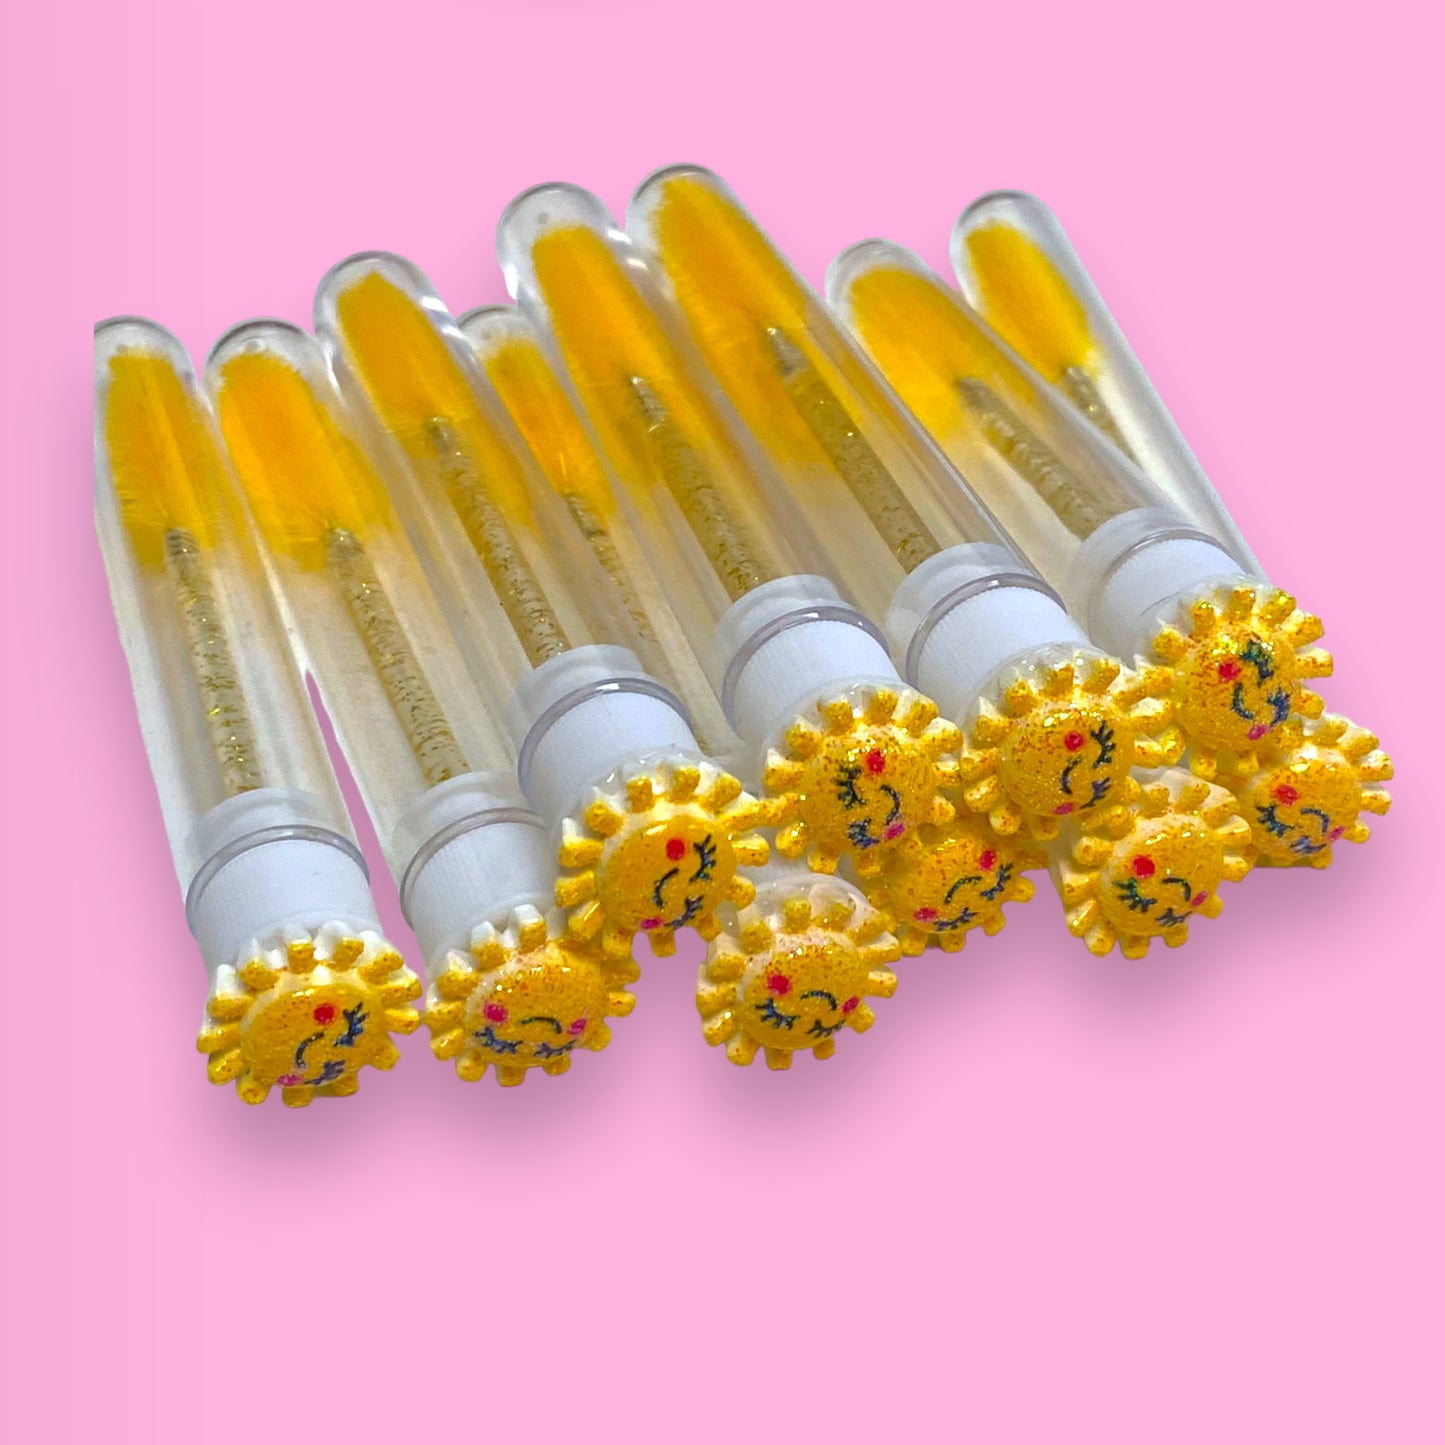 Lash Extension Spoolie Brush with Cover - Sunflower